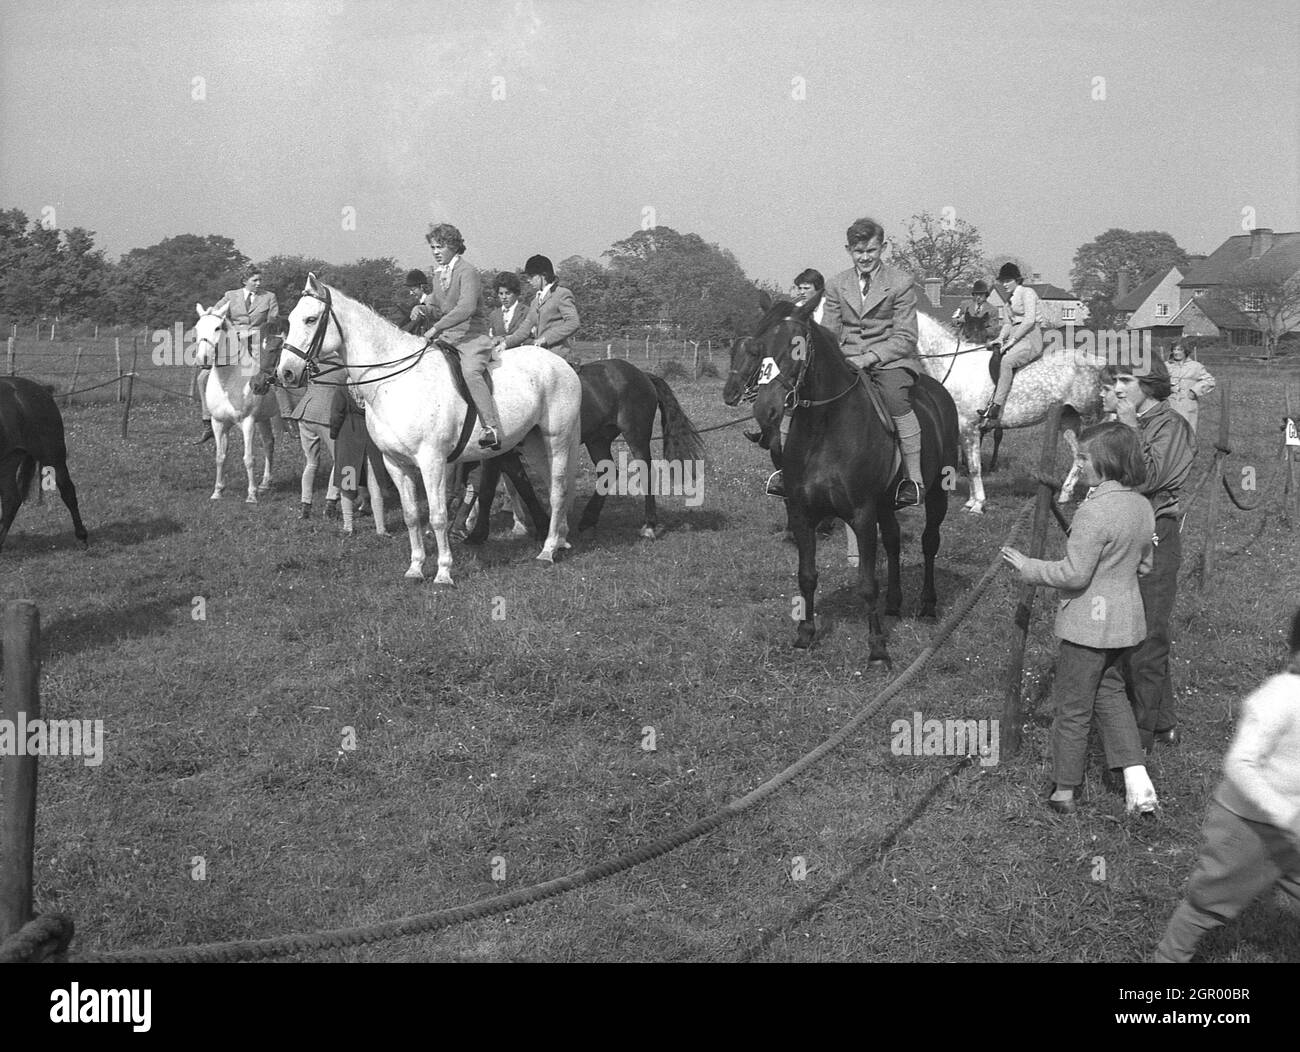 1950s, historical, boy and girl riders on their horses, some wearing helmets, some not, outside in the collecting ring, a special roped off warm-up area at an eventing competition, West Sussex, England, UK. For some riders, the collecting ring can be nerve-racking, more so than the competition arena. Stock Photo